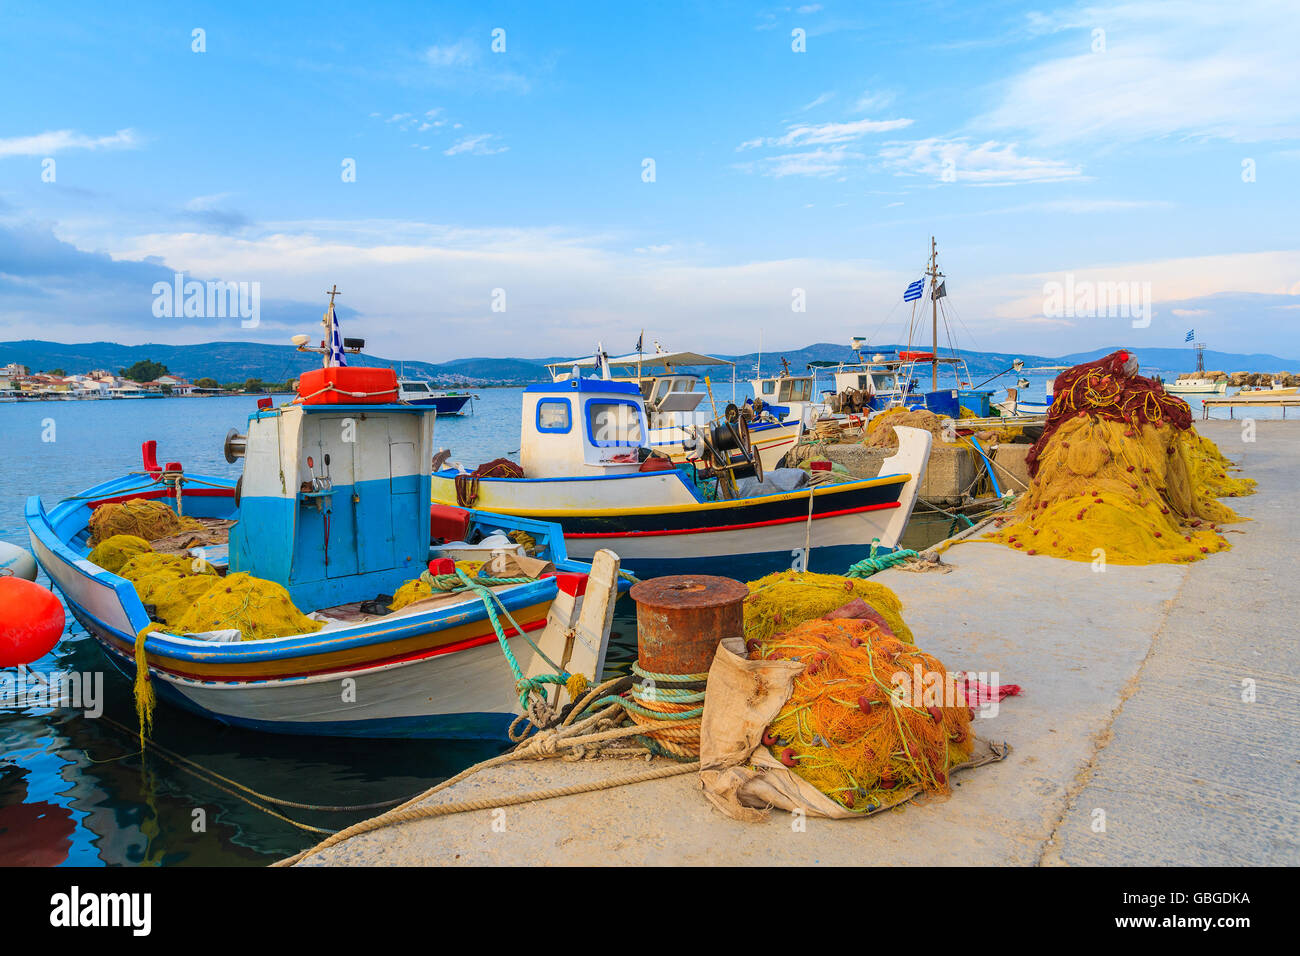 Typical Greek fishing boats in port at sunset time, Samos island, Greece Stock Photo